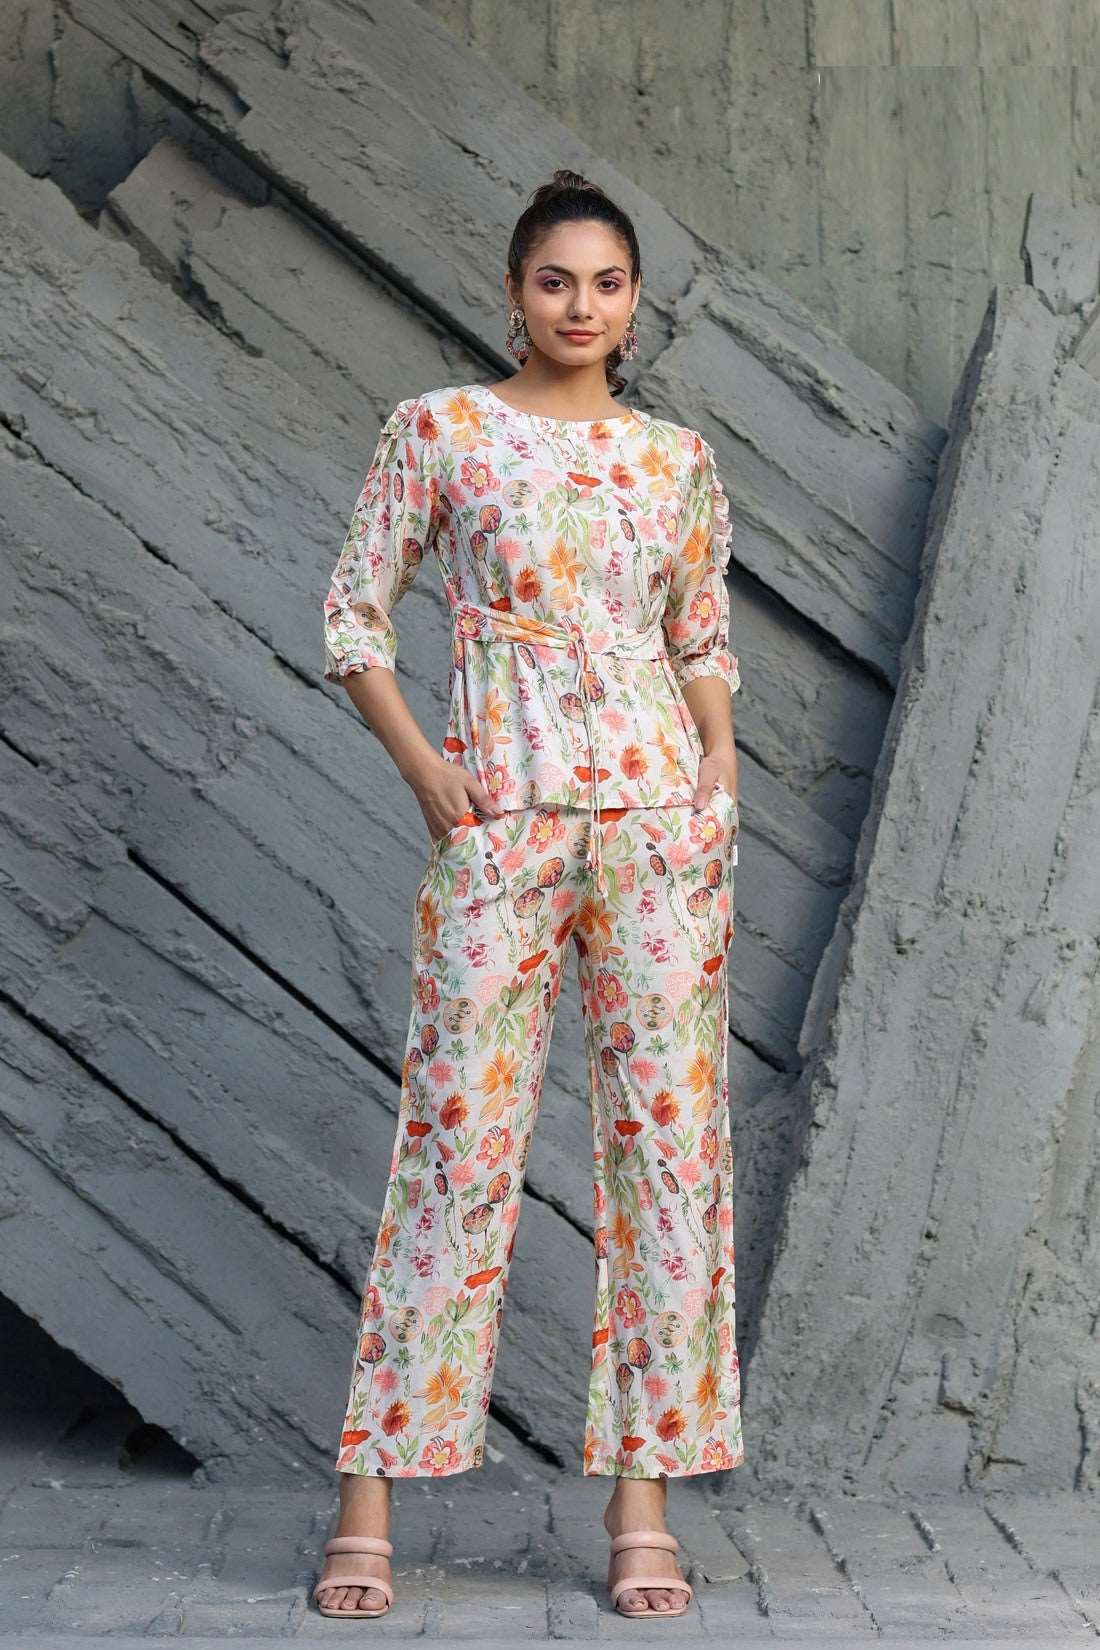 The model in the image is wearing Floral Printed Cotton Womens Co ords from Alice Milan. Crafted with the finest materials and impeccable attention to detail, the Co-ord Set looks premium, trendy, luxurious and offers unparalleled comfort. It’s a perfect clothing option for loungewear, resort wear, party wear or for an airport look. The woman in the image looks happy, and confident with her style statement putting a happy smile on her face.